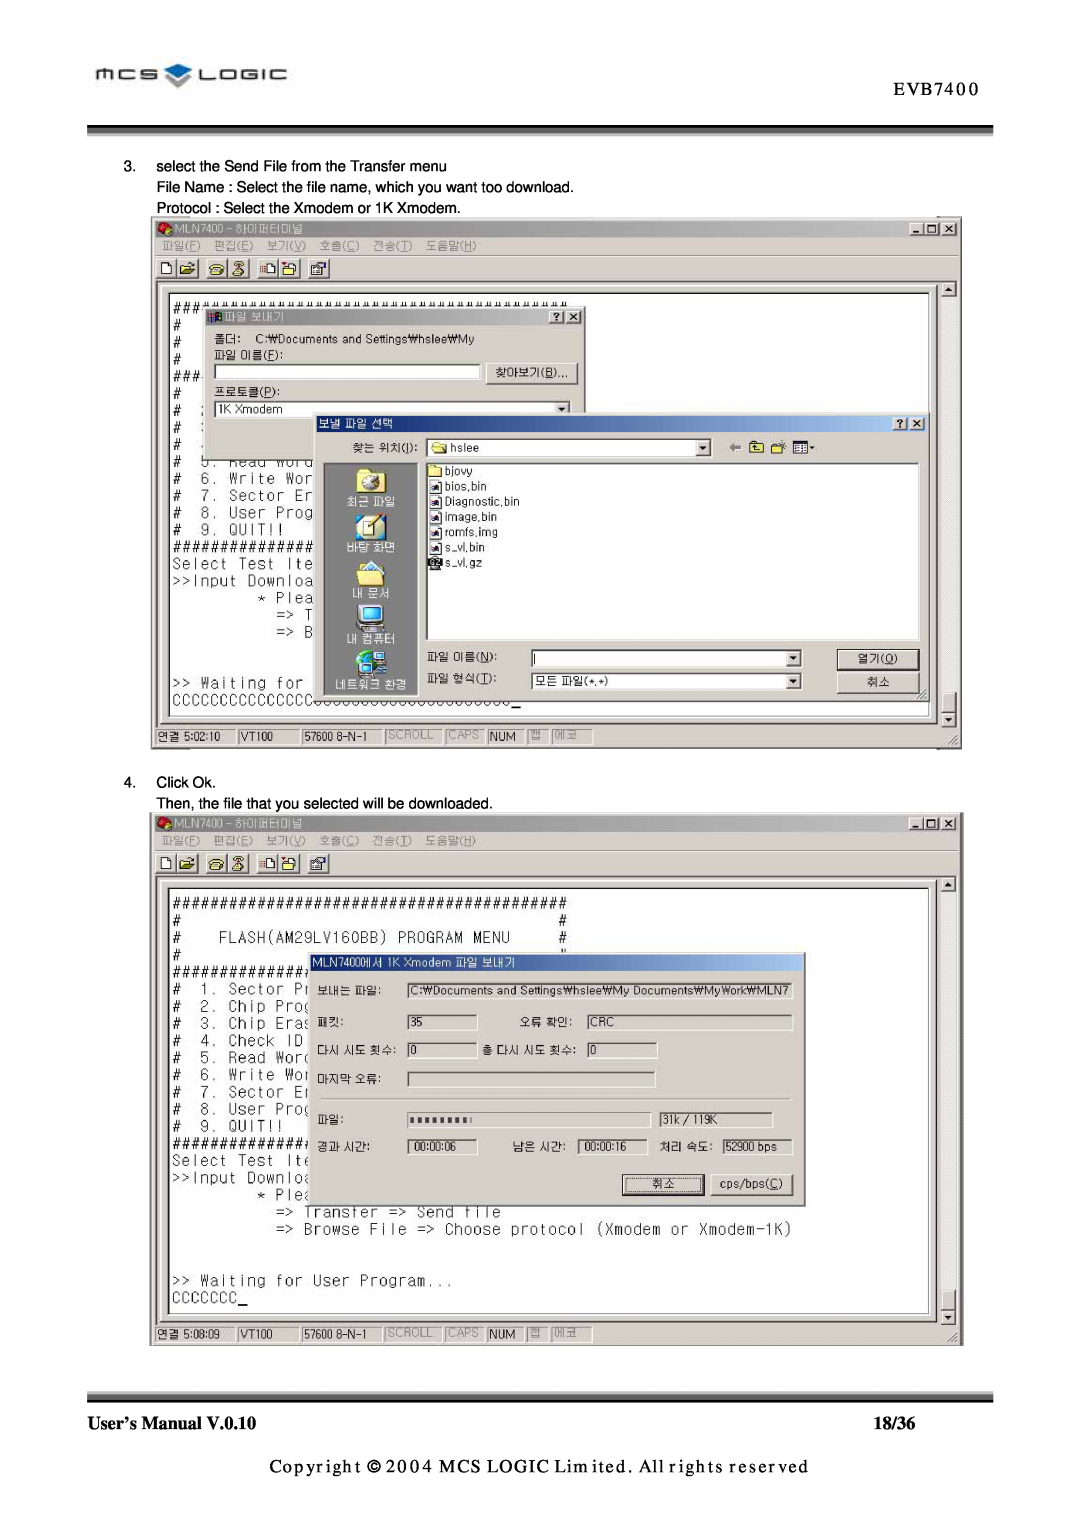 ADC MLN7400 EVB7400, select the Send File from the Transfer menu, Protocol Select the Xmodem or 1K Xmodem 4. Click Ok 